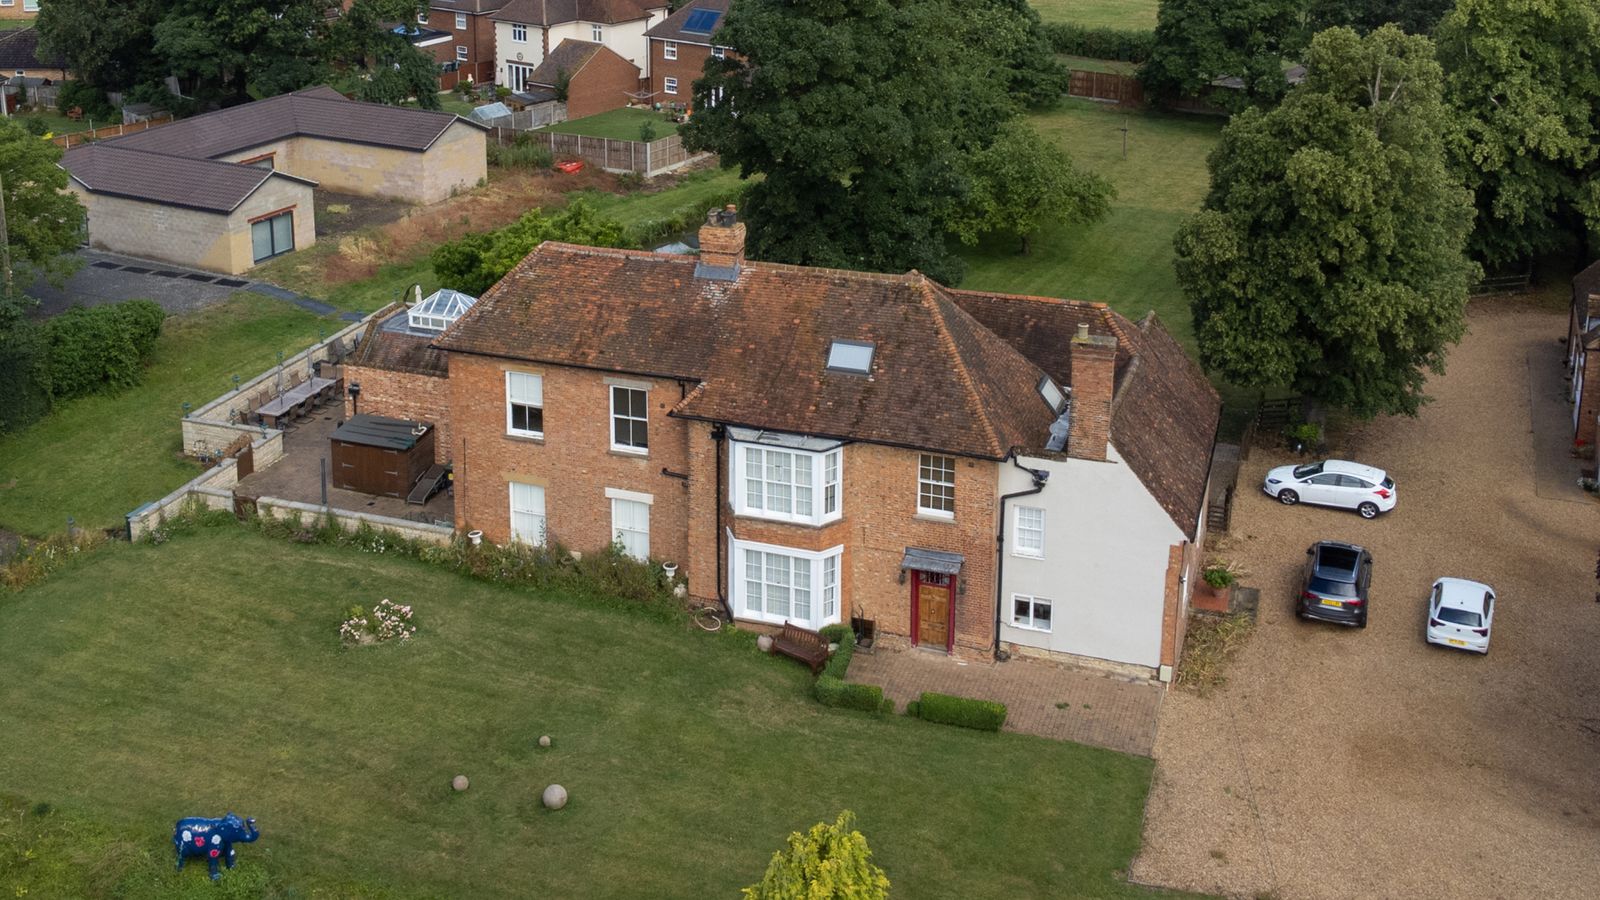 Captain Sir Tom Moore's home where he raised millions for NHS is up for sale